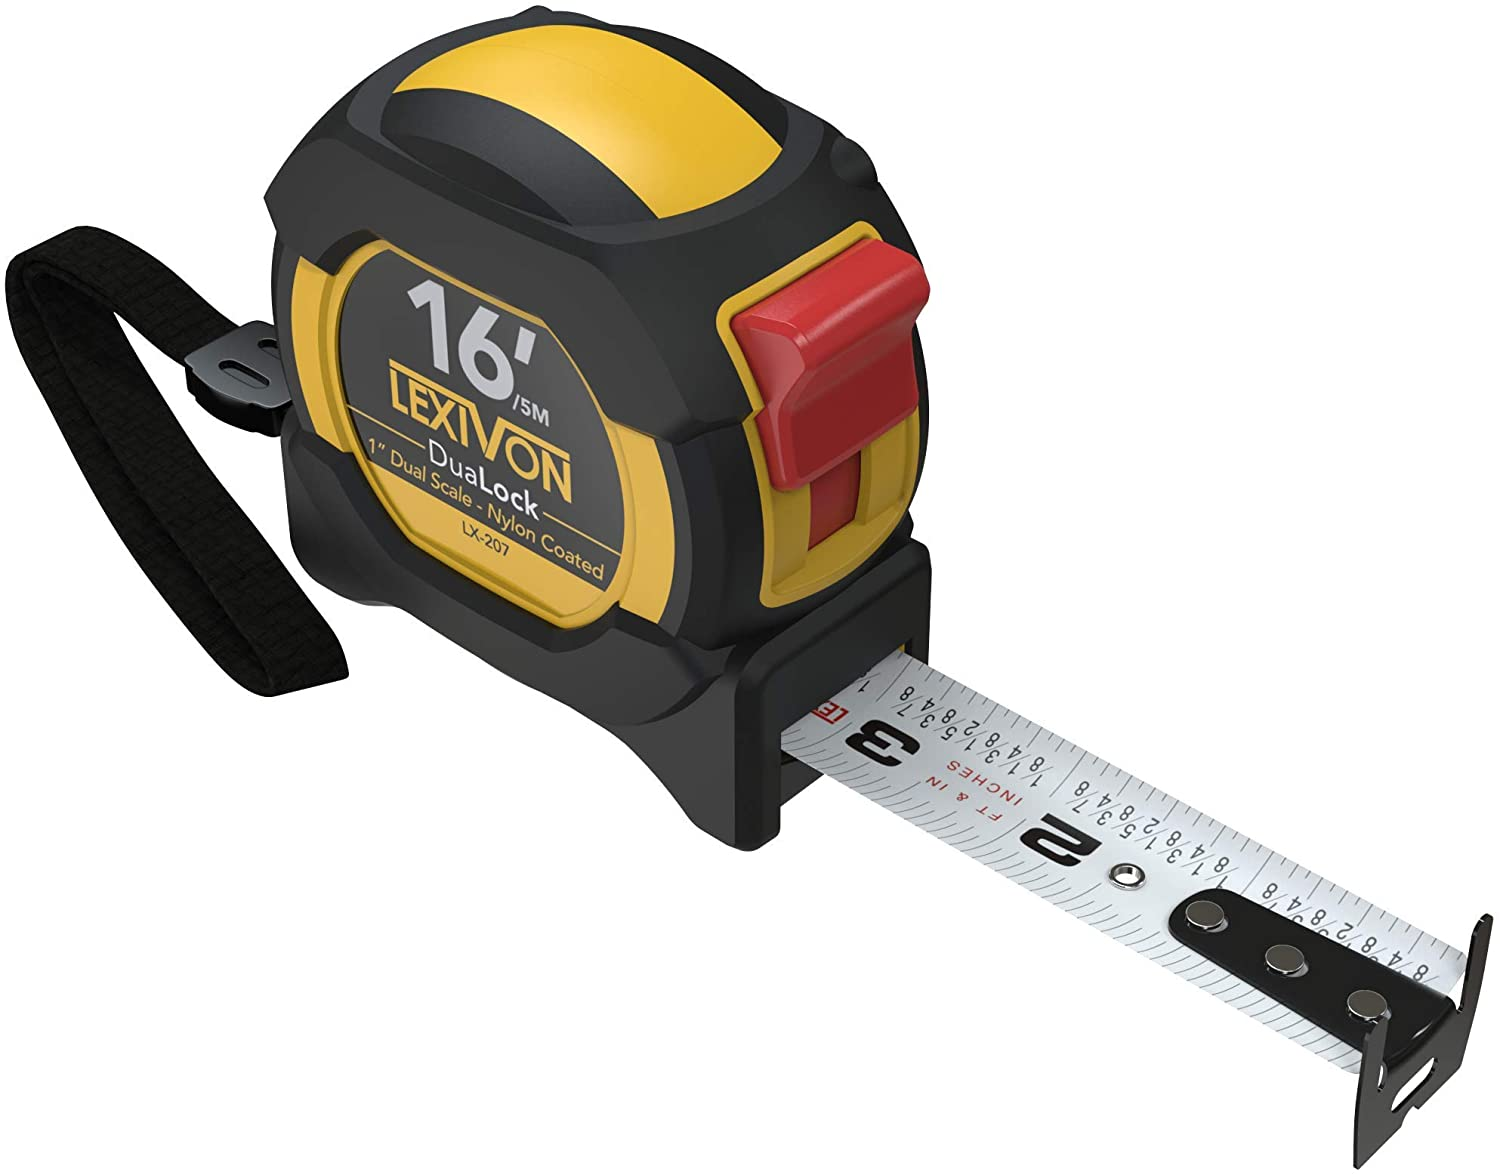 LEXIVON 16Ft/5m DuaLock Tape Measure | 1-Inch Wide Blade with Nylon Coating, Matt Finish White & Yellow Dual Sided Rule Print | Ft/Inch/Fractions/Metric (LX-207)